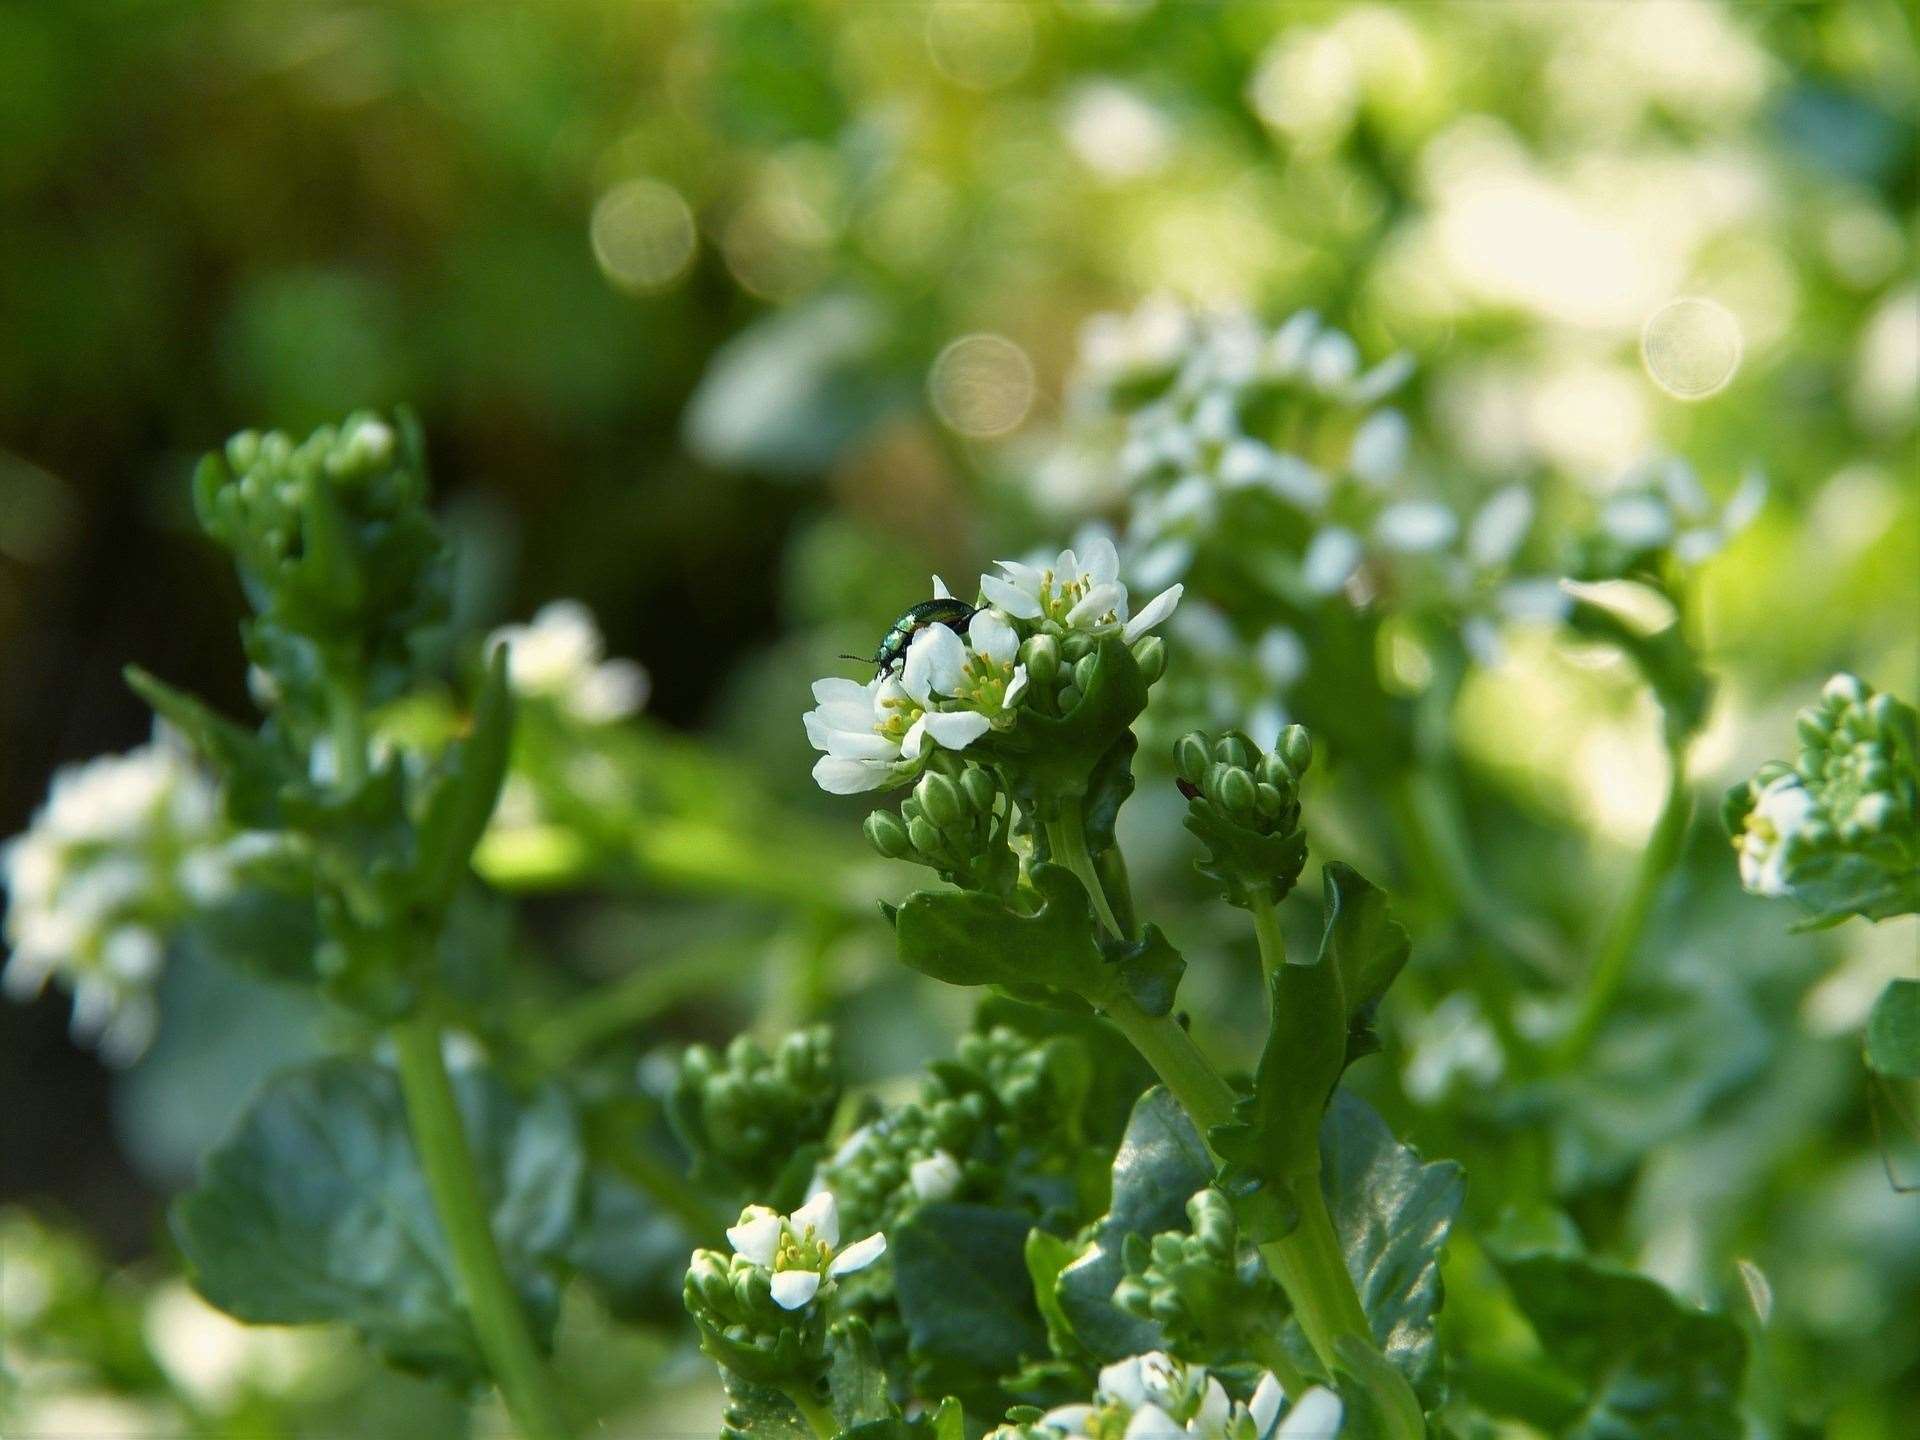 Scurvy grass has a strong flavour but has many uses.